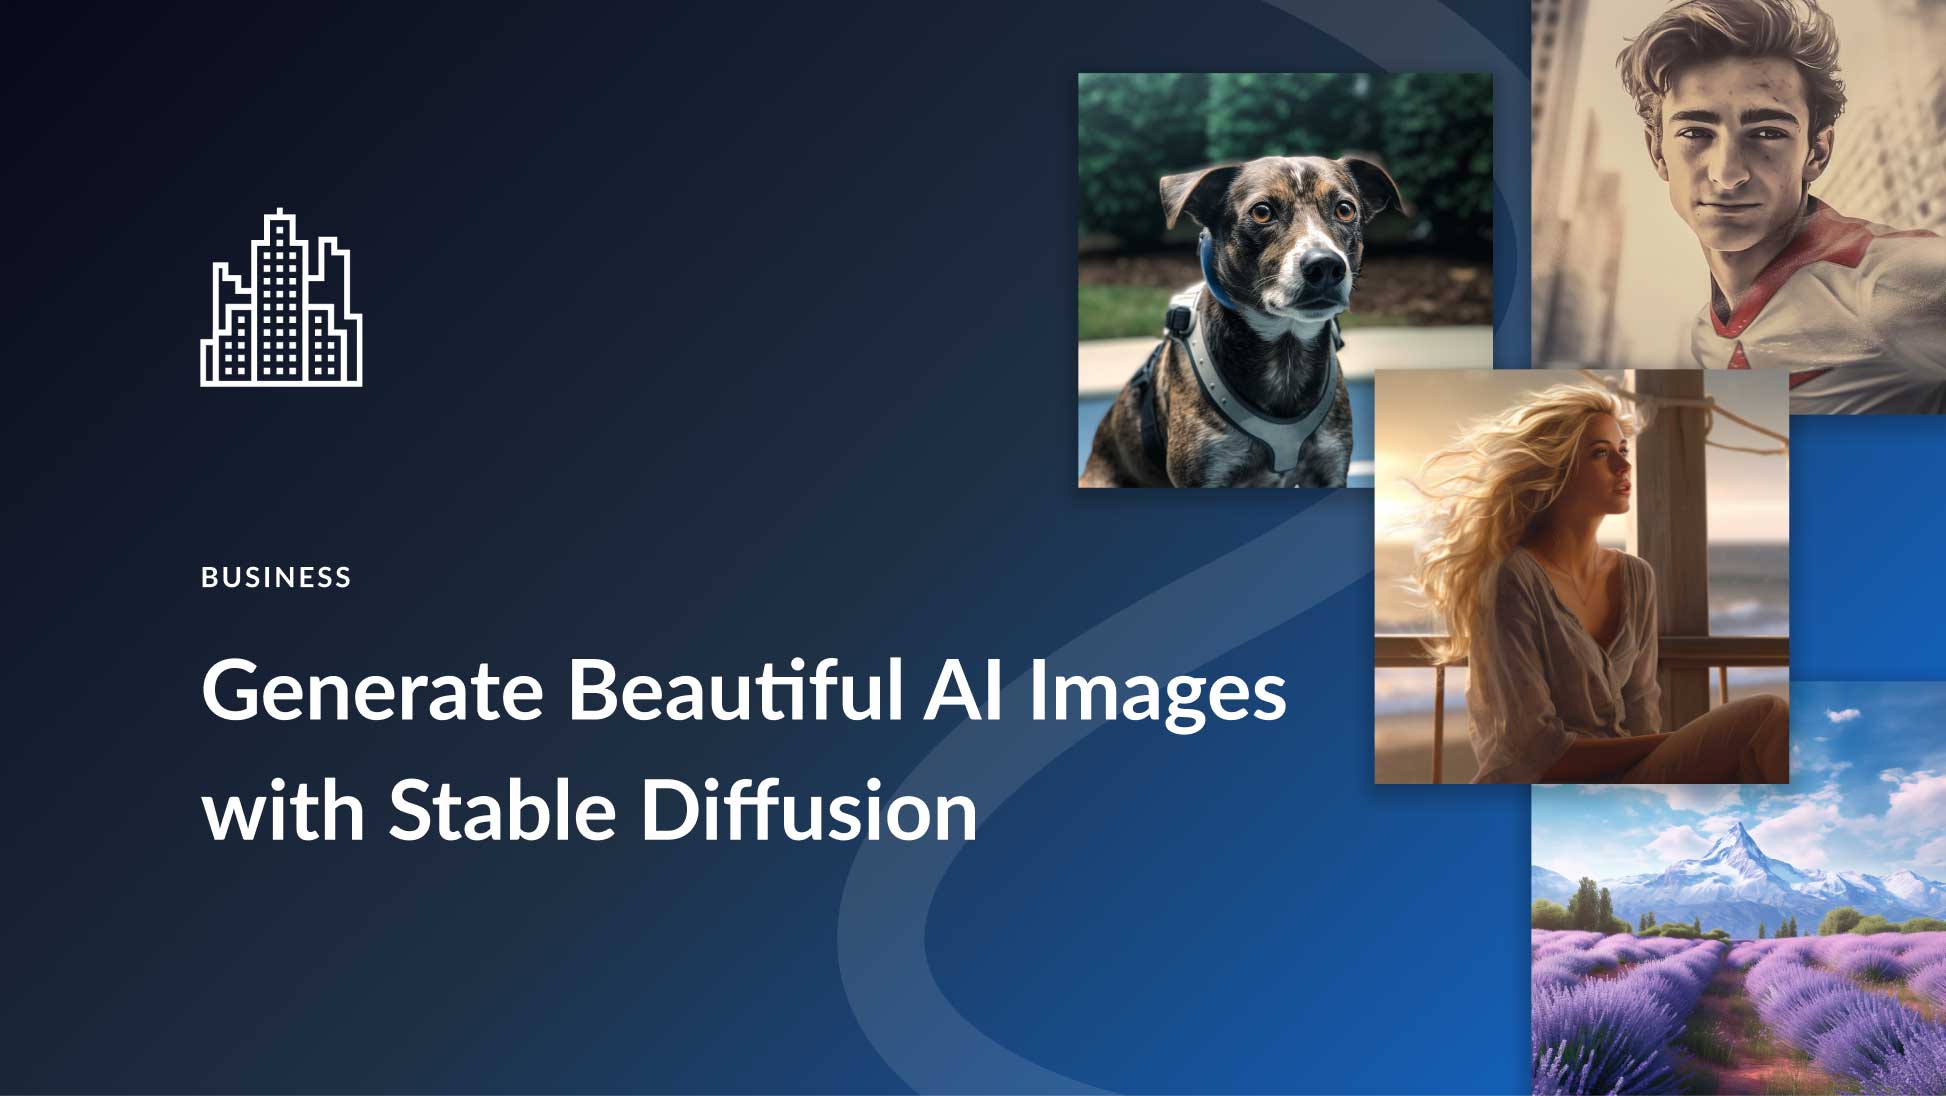 How to Run Stable Diffusion Locally to Generate Images